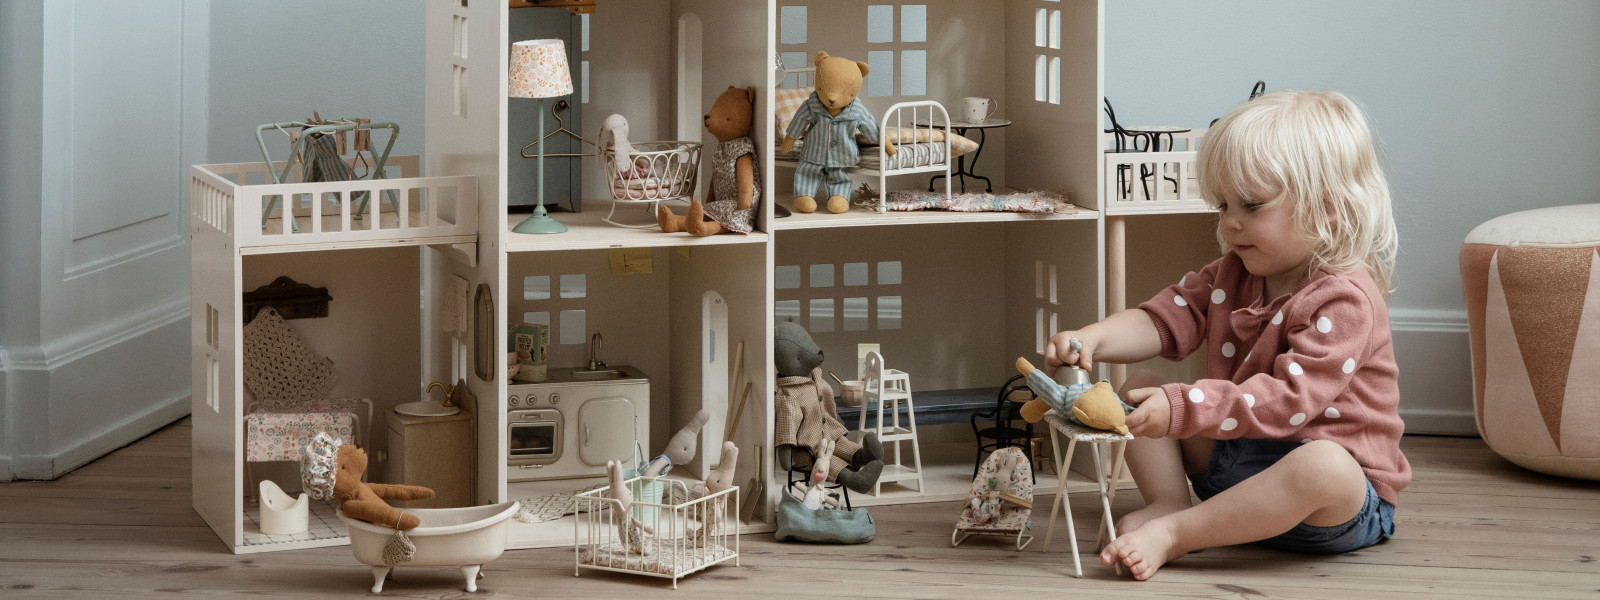 Doll House – Darlingsmy